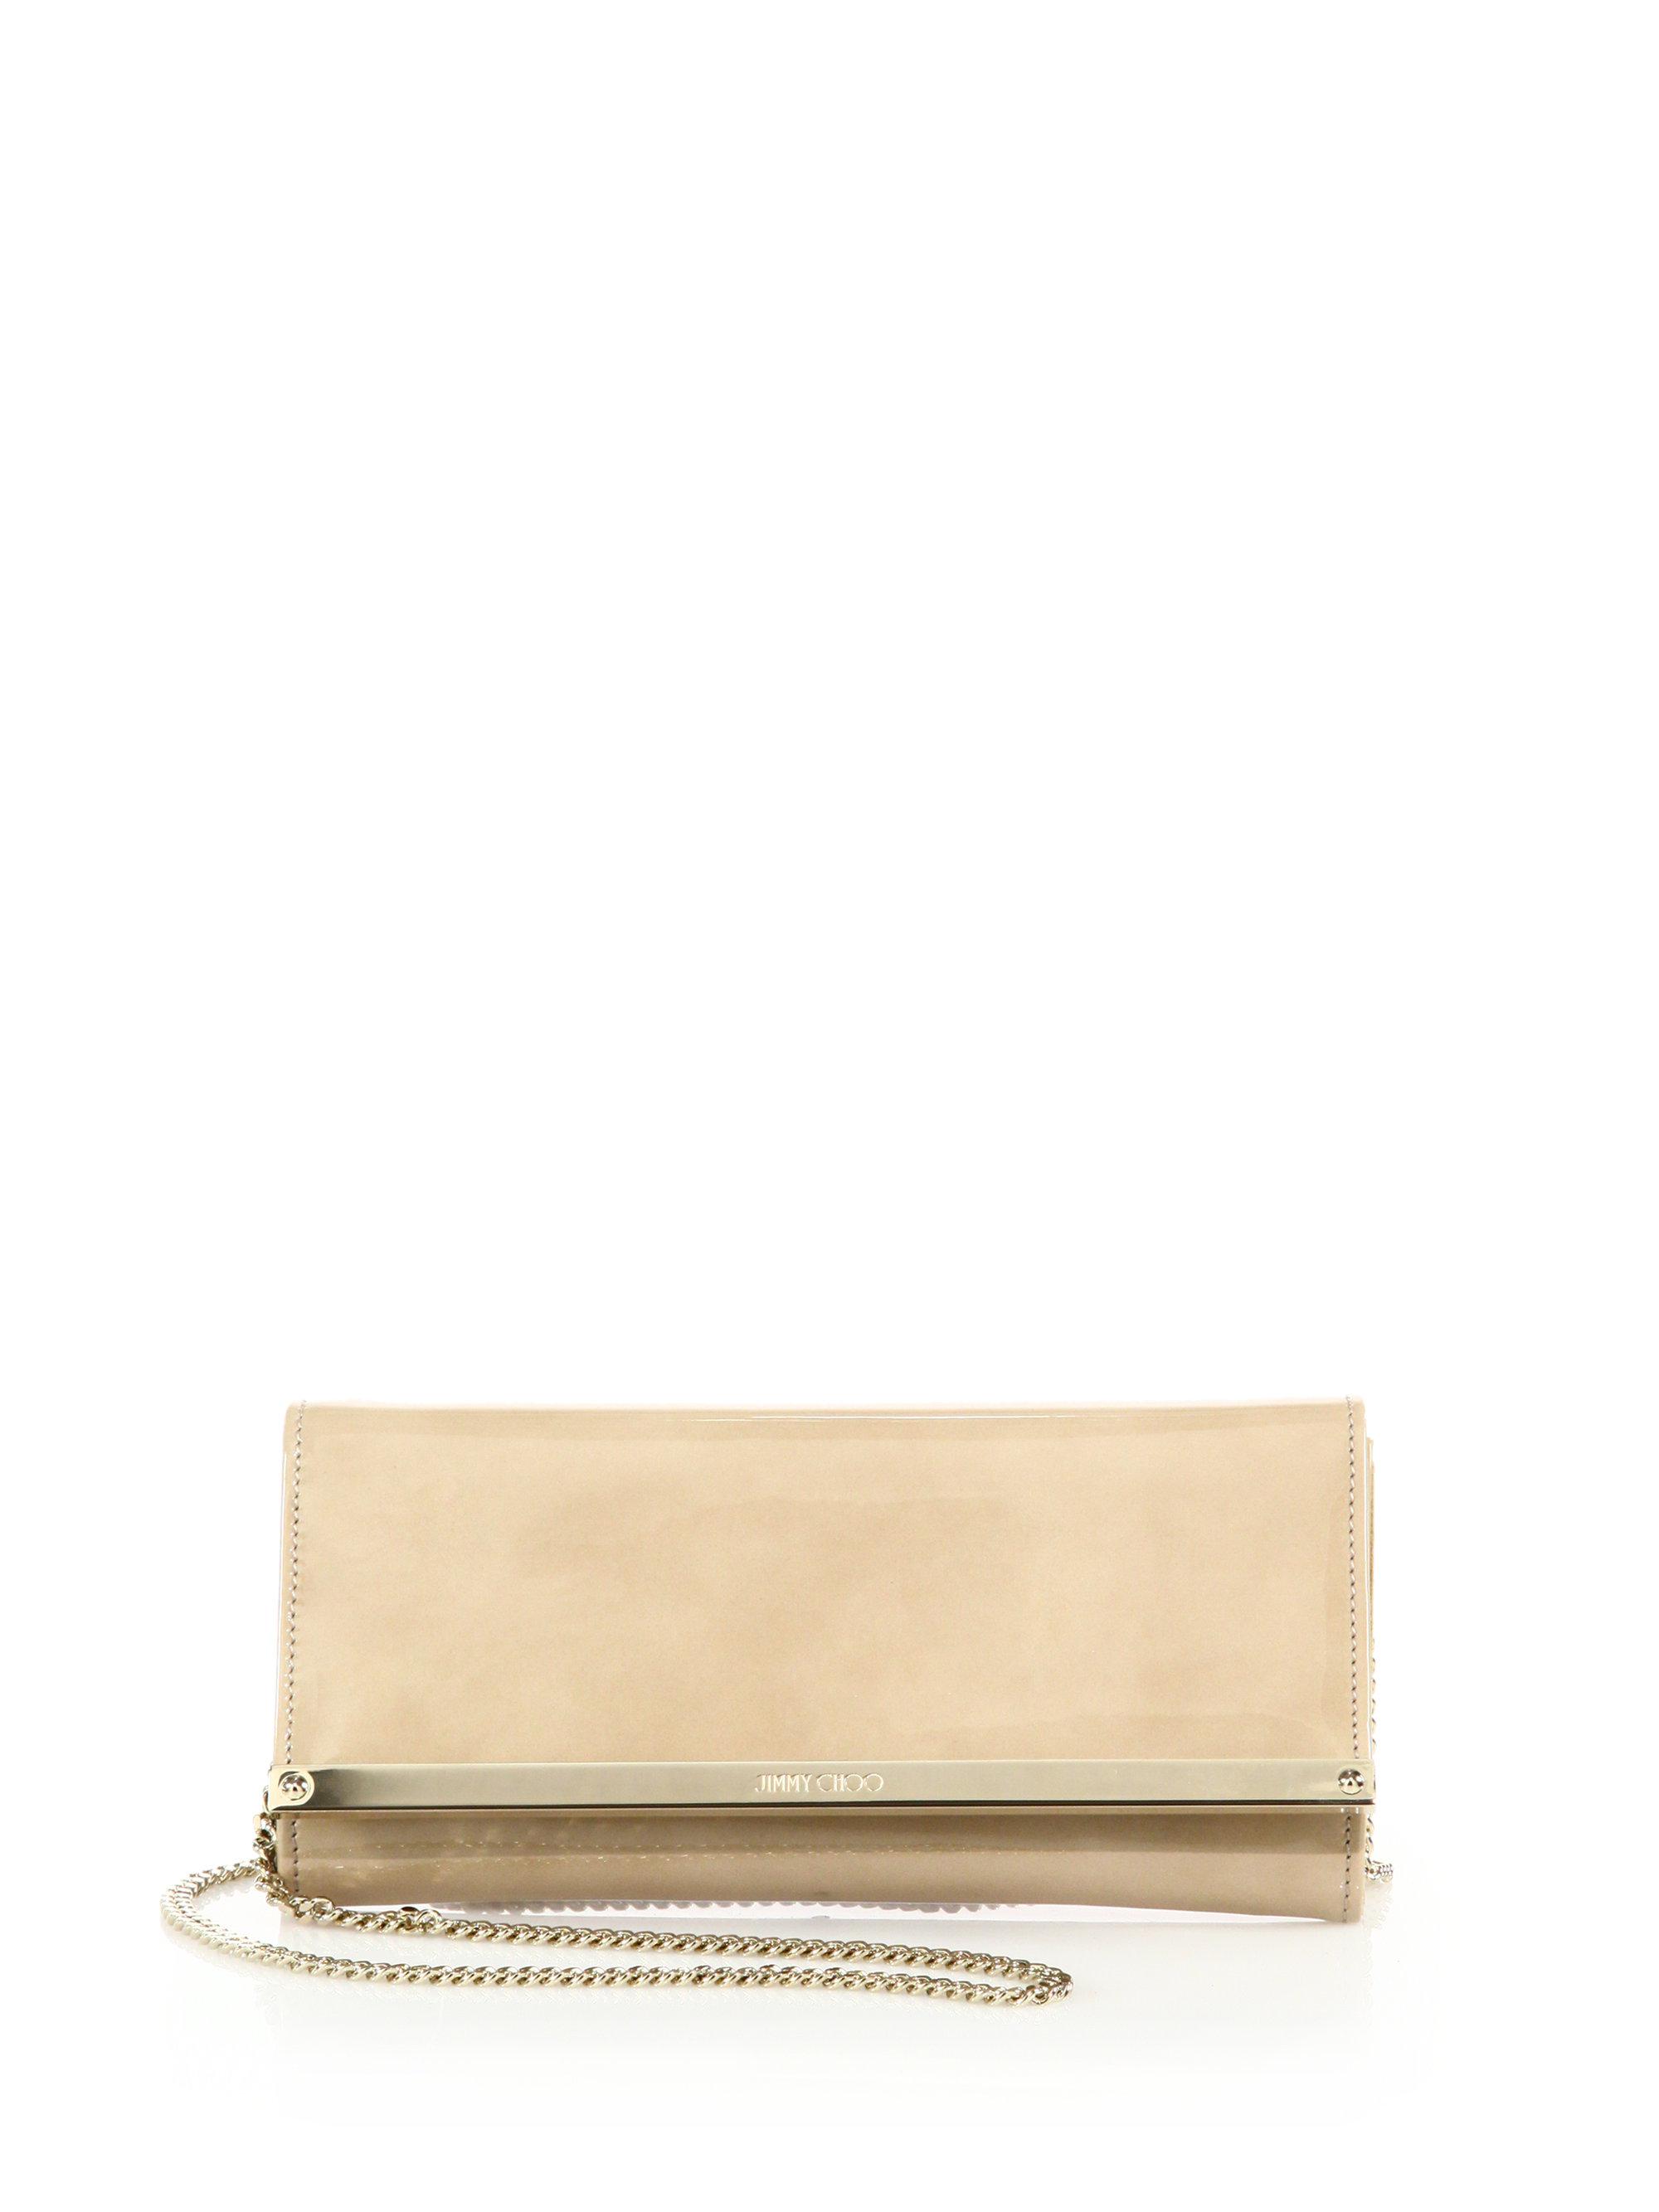 Jimmy Choo Milla Patent Leather & Suede Clutch in Nude (Natural) | Lyst